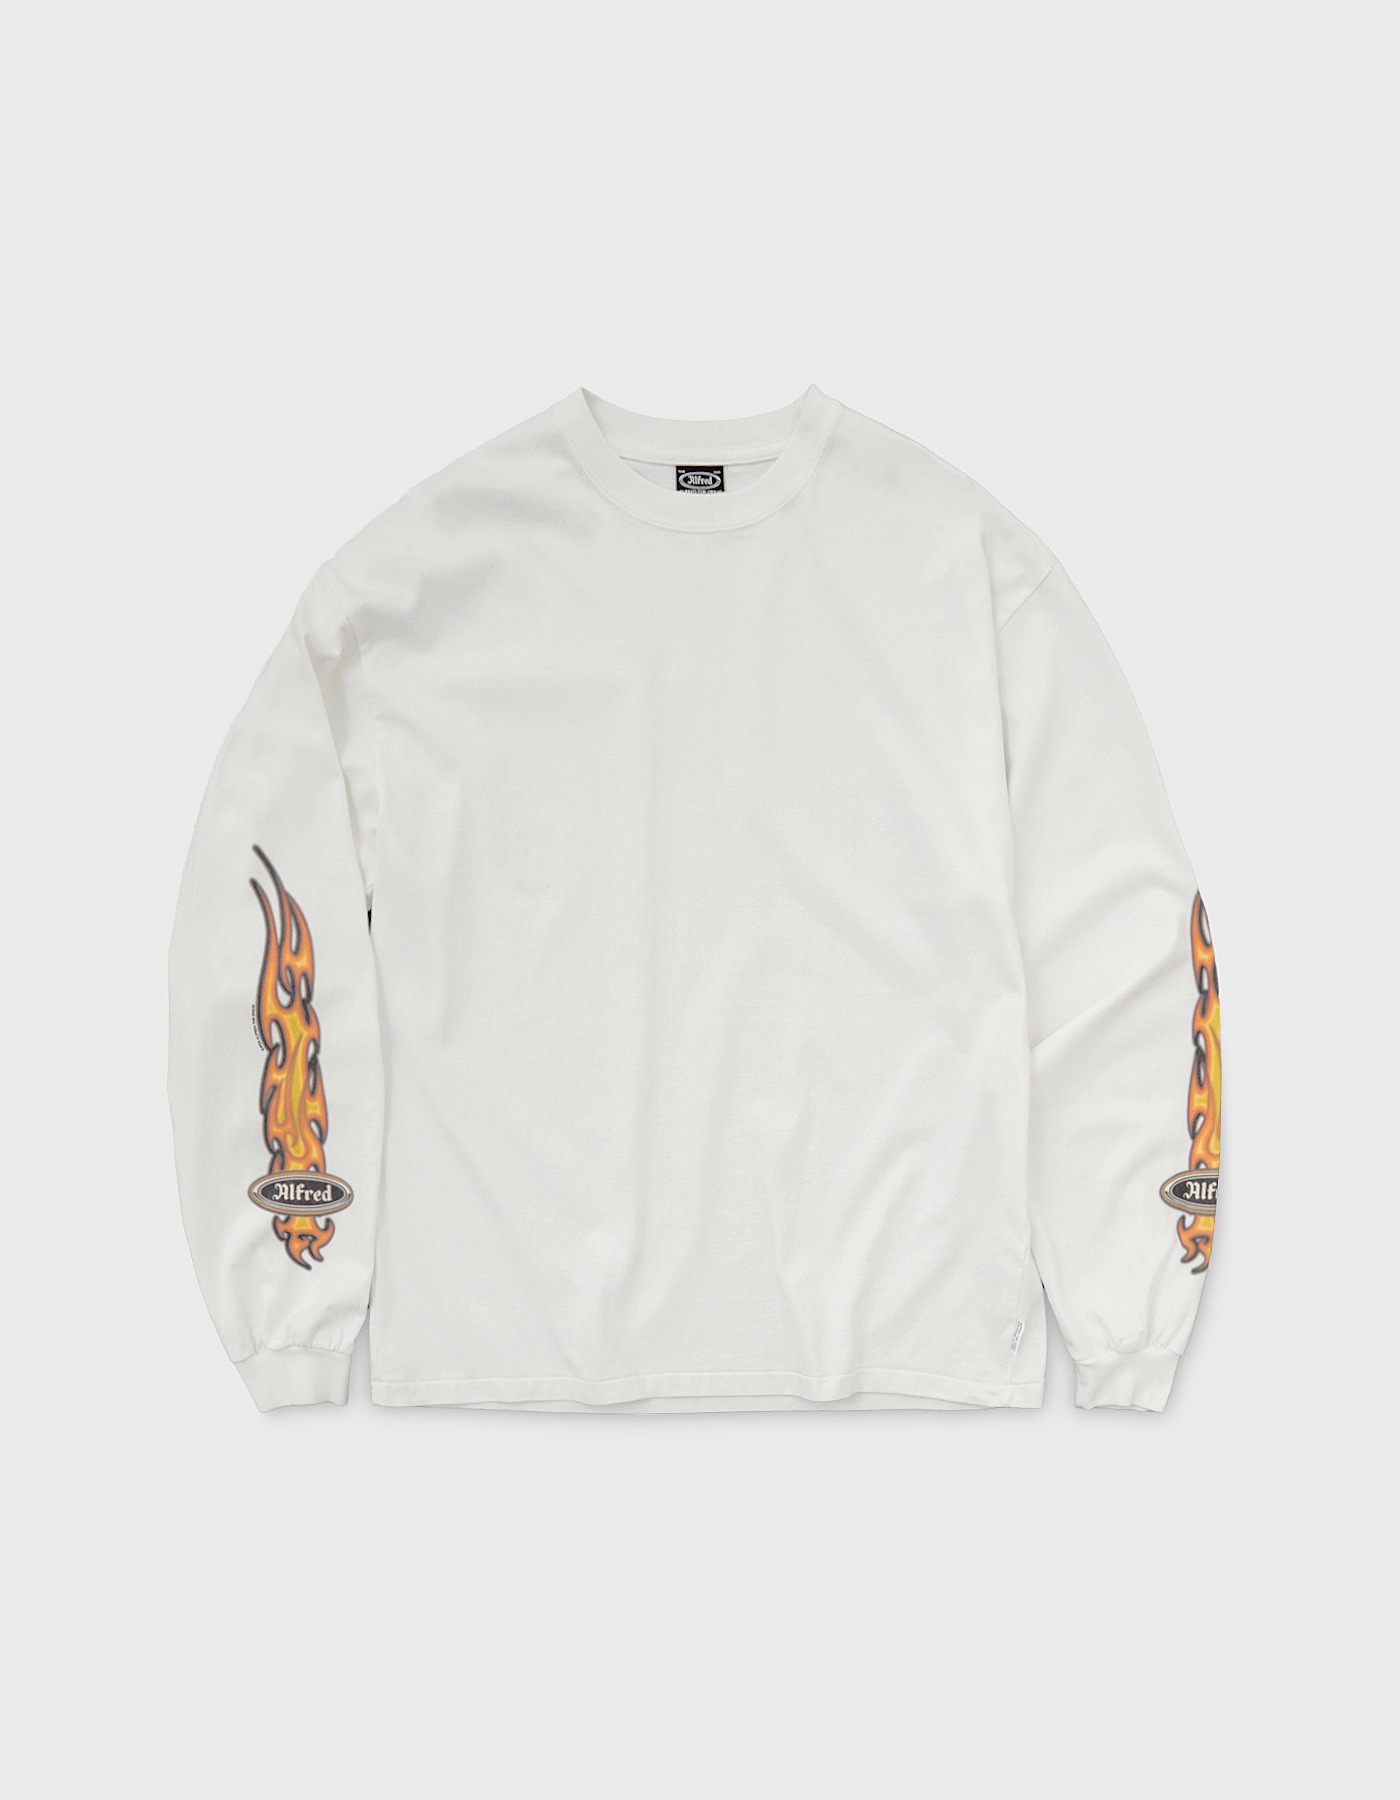 FRED FLAME LONG SLEEVE / White